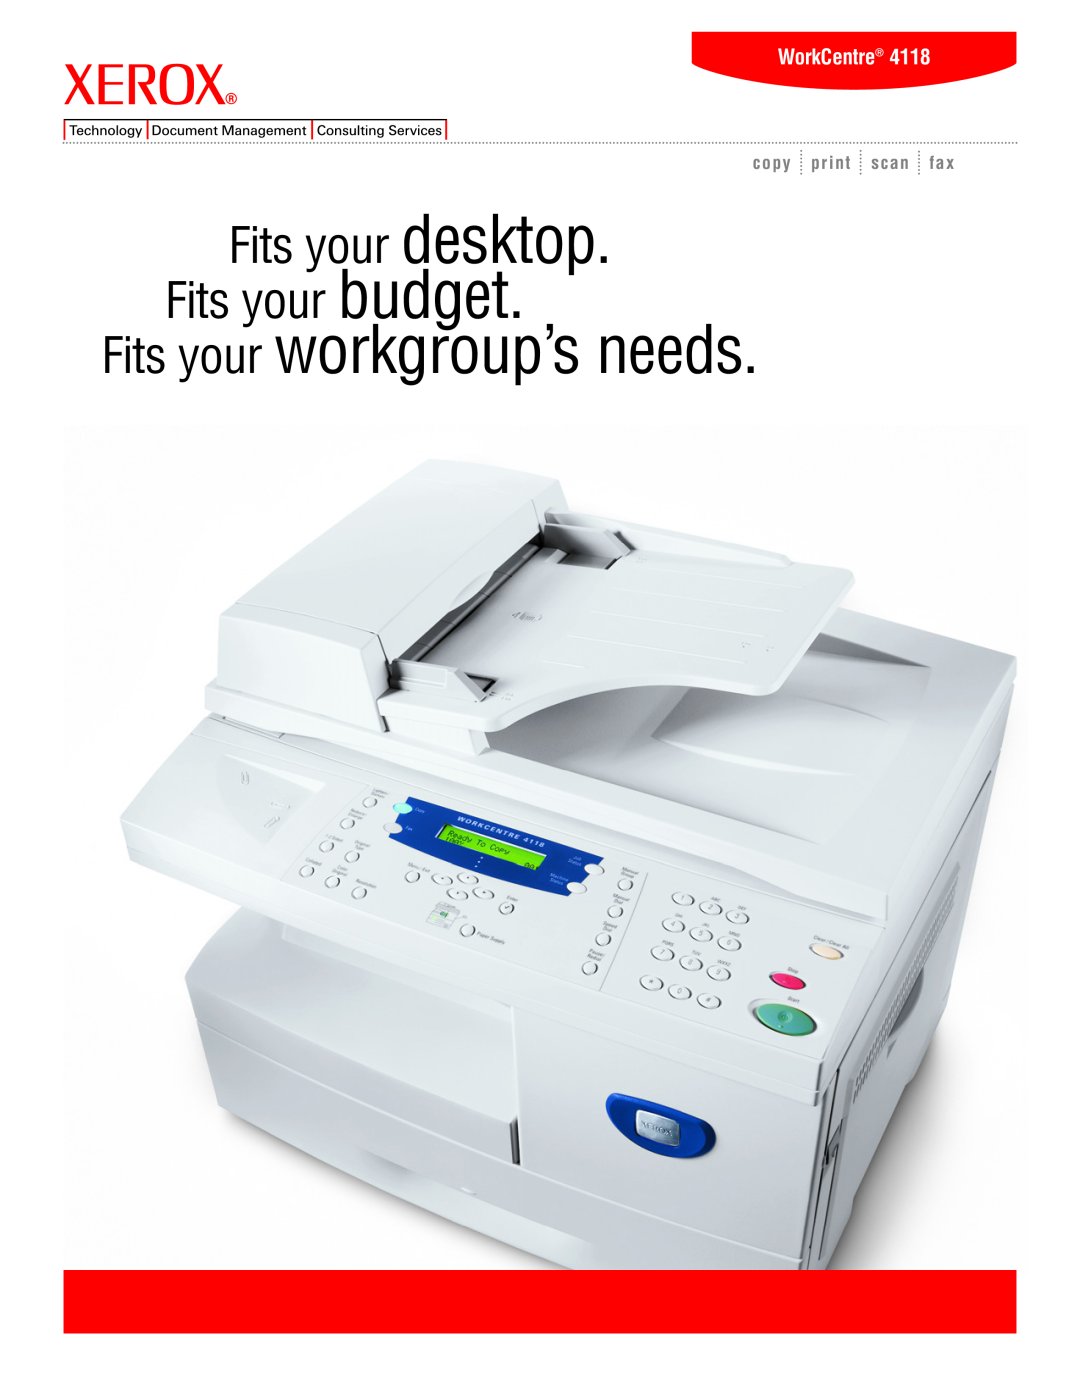 Xerox 4118 manual WorkCentre, Quick Reference, Overview, General Setup, Basic Copying, Advanced Copy Features, Mailbox 